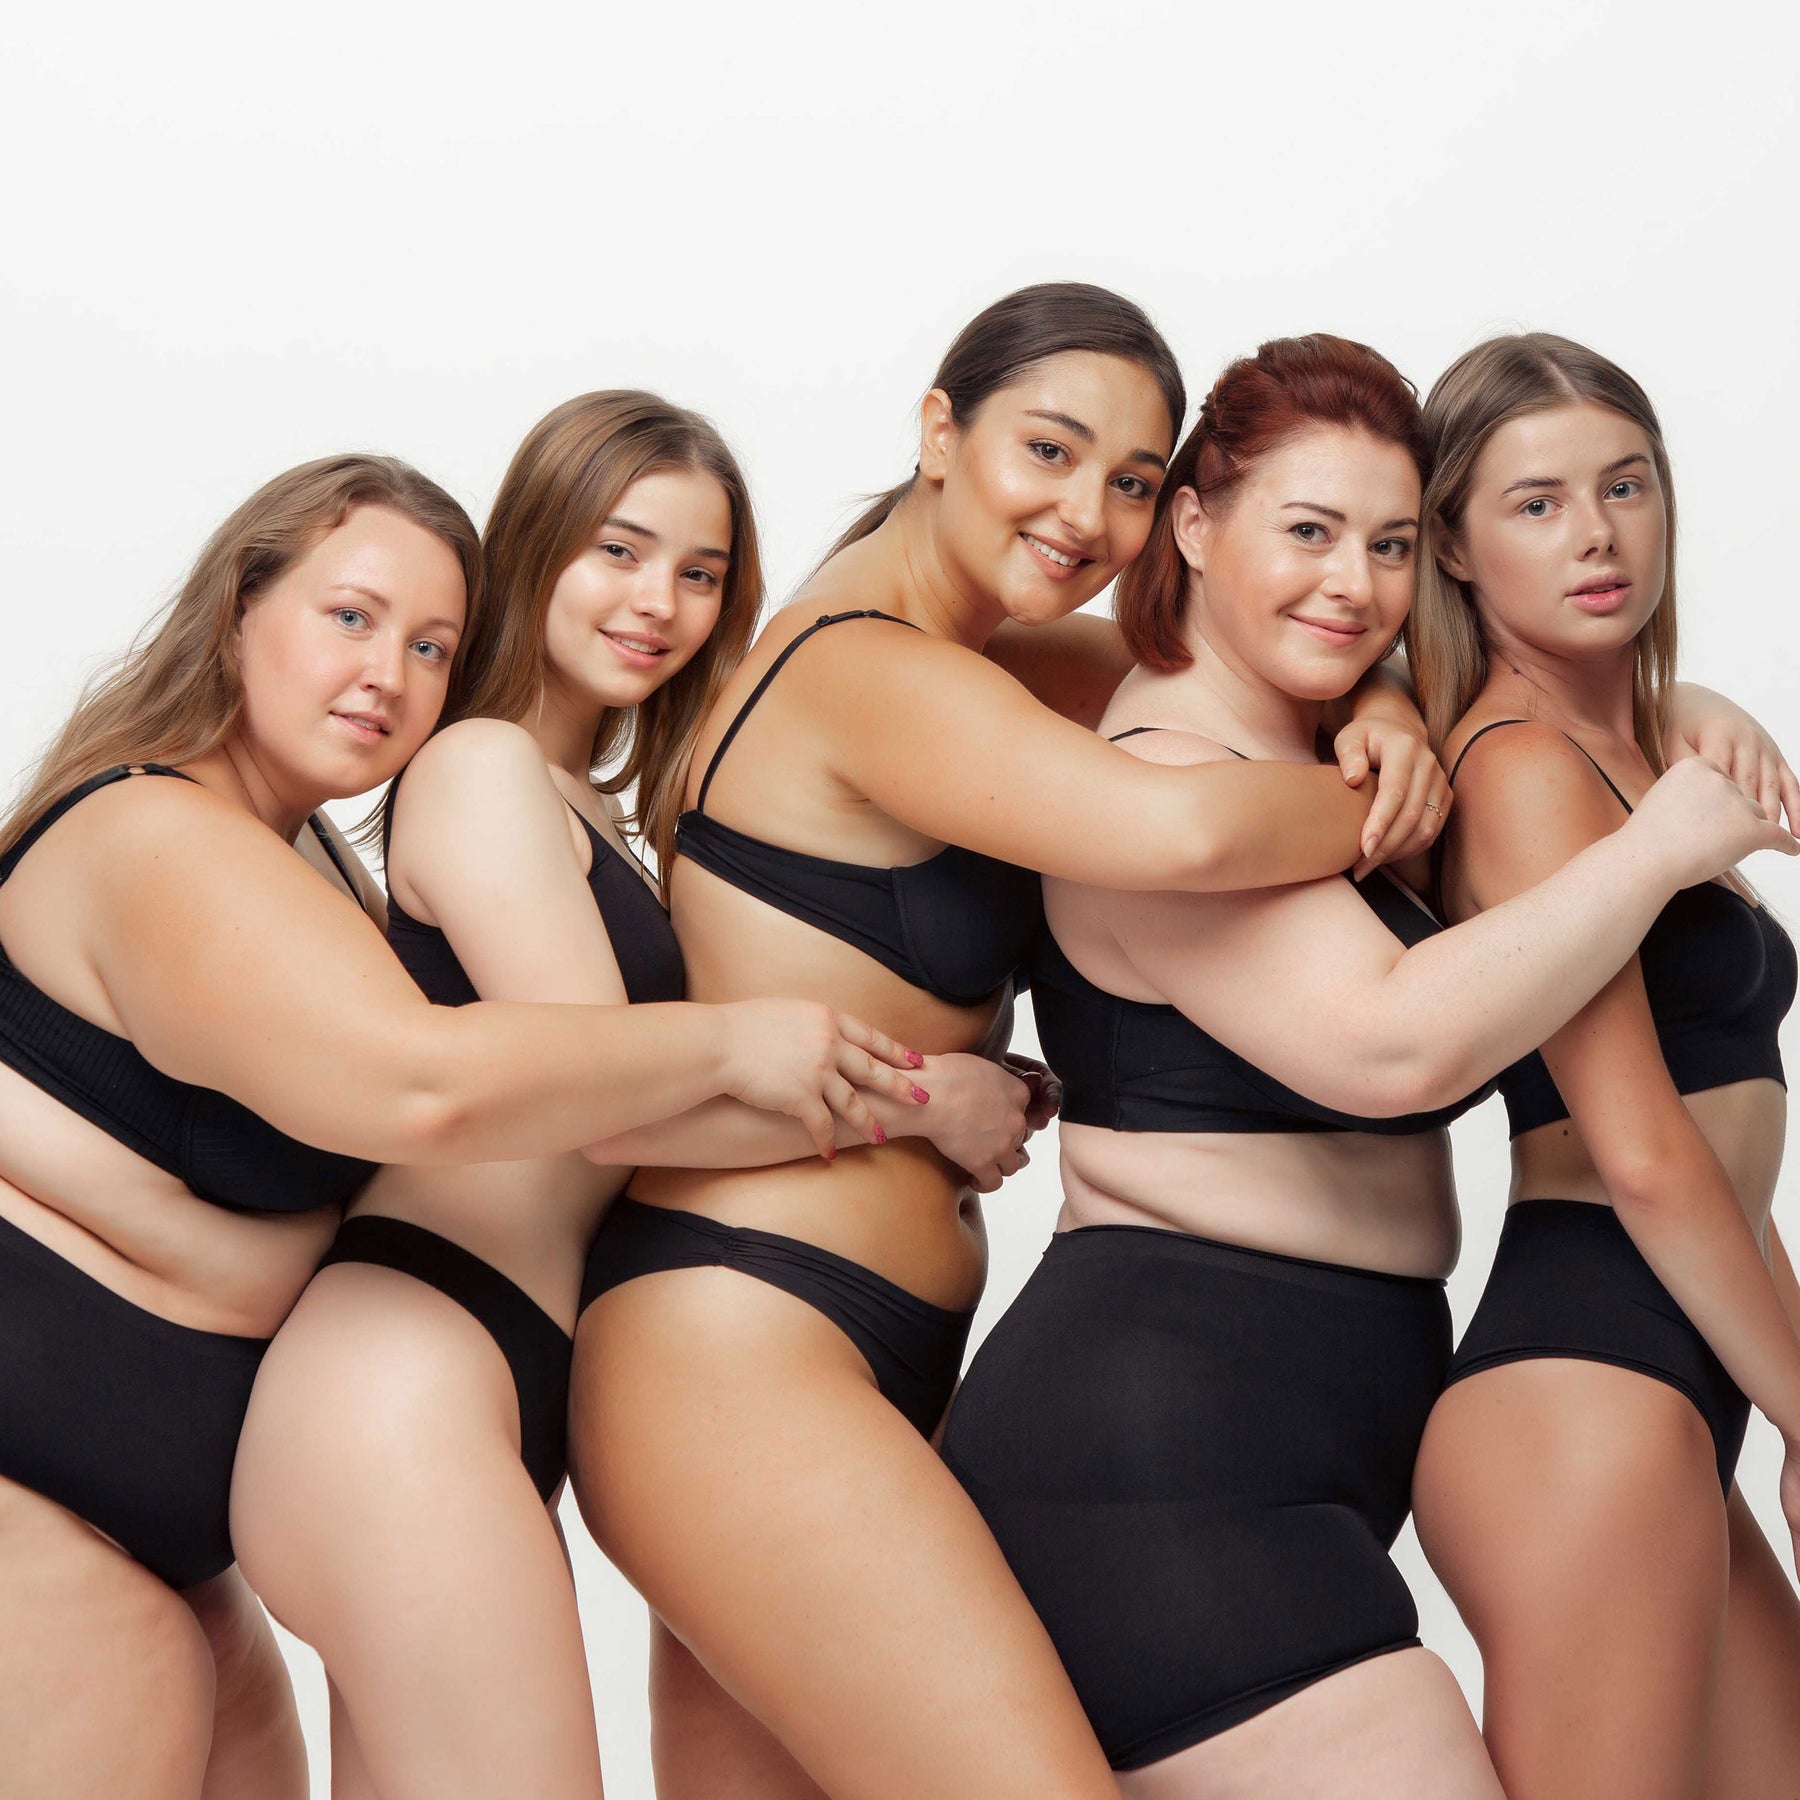 women with different body shapes hugging each other